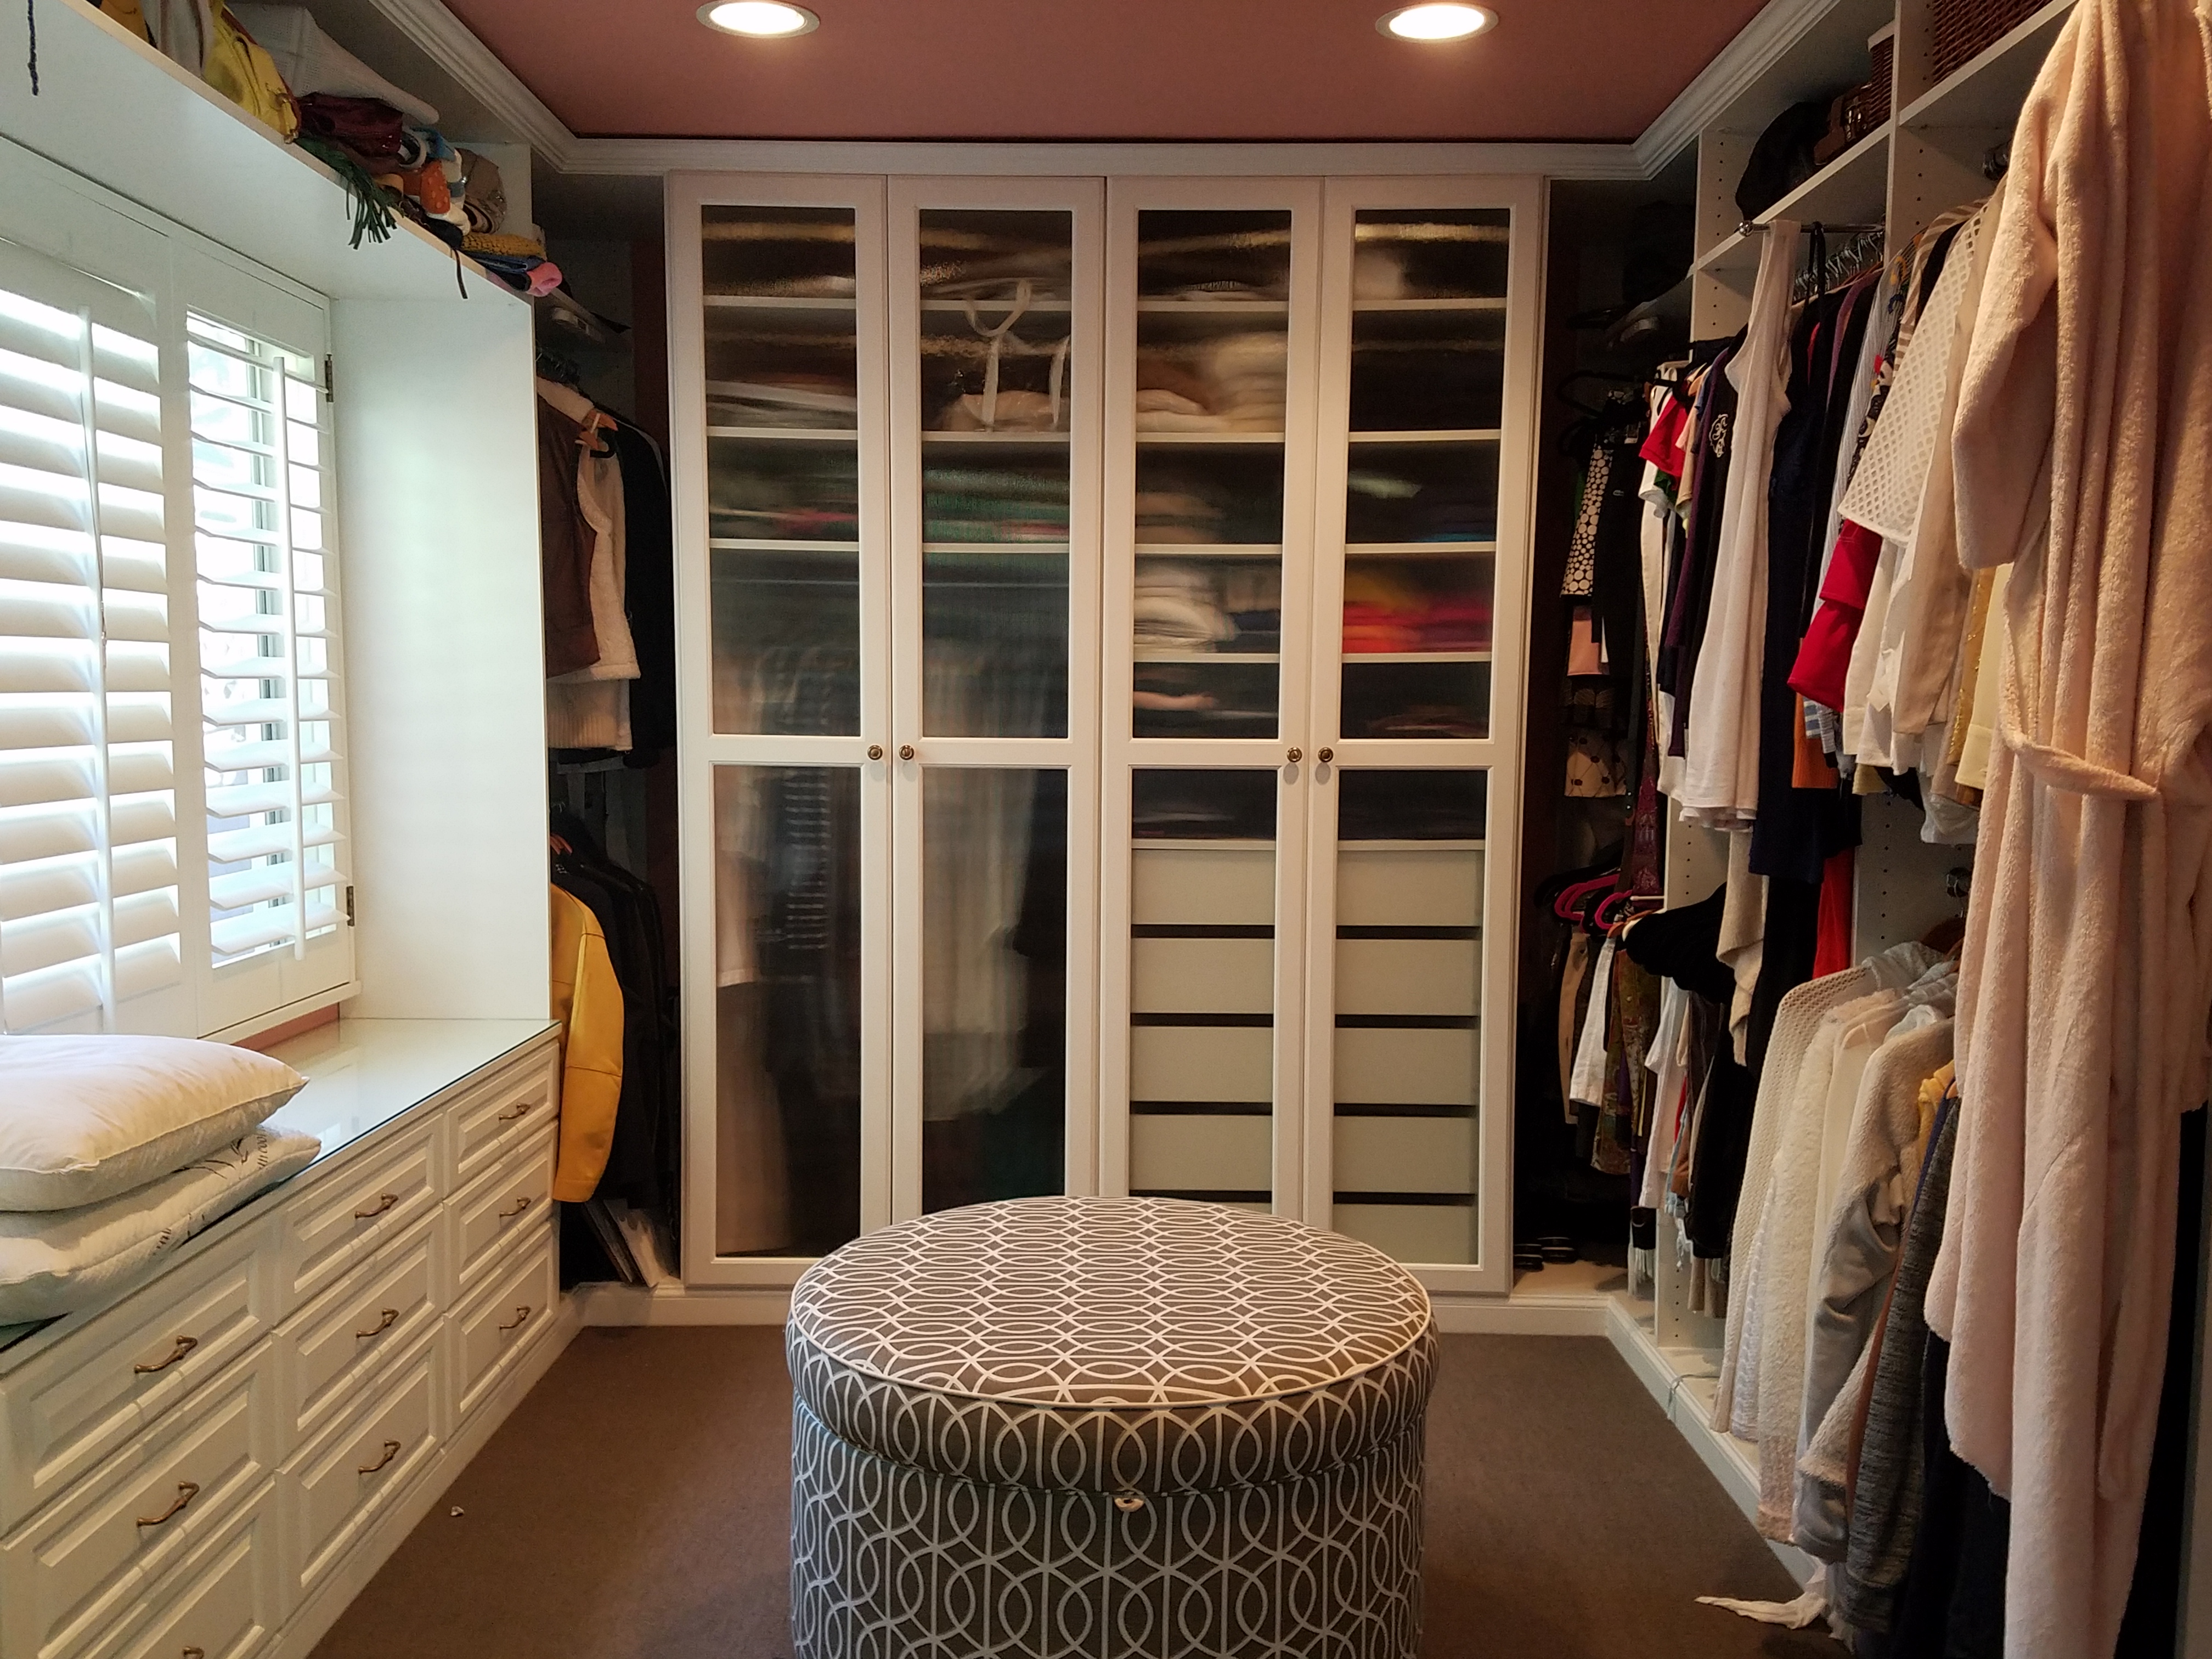 How to Choose the Right Closet System